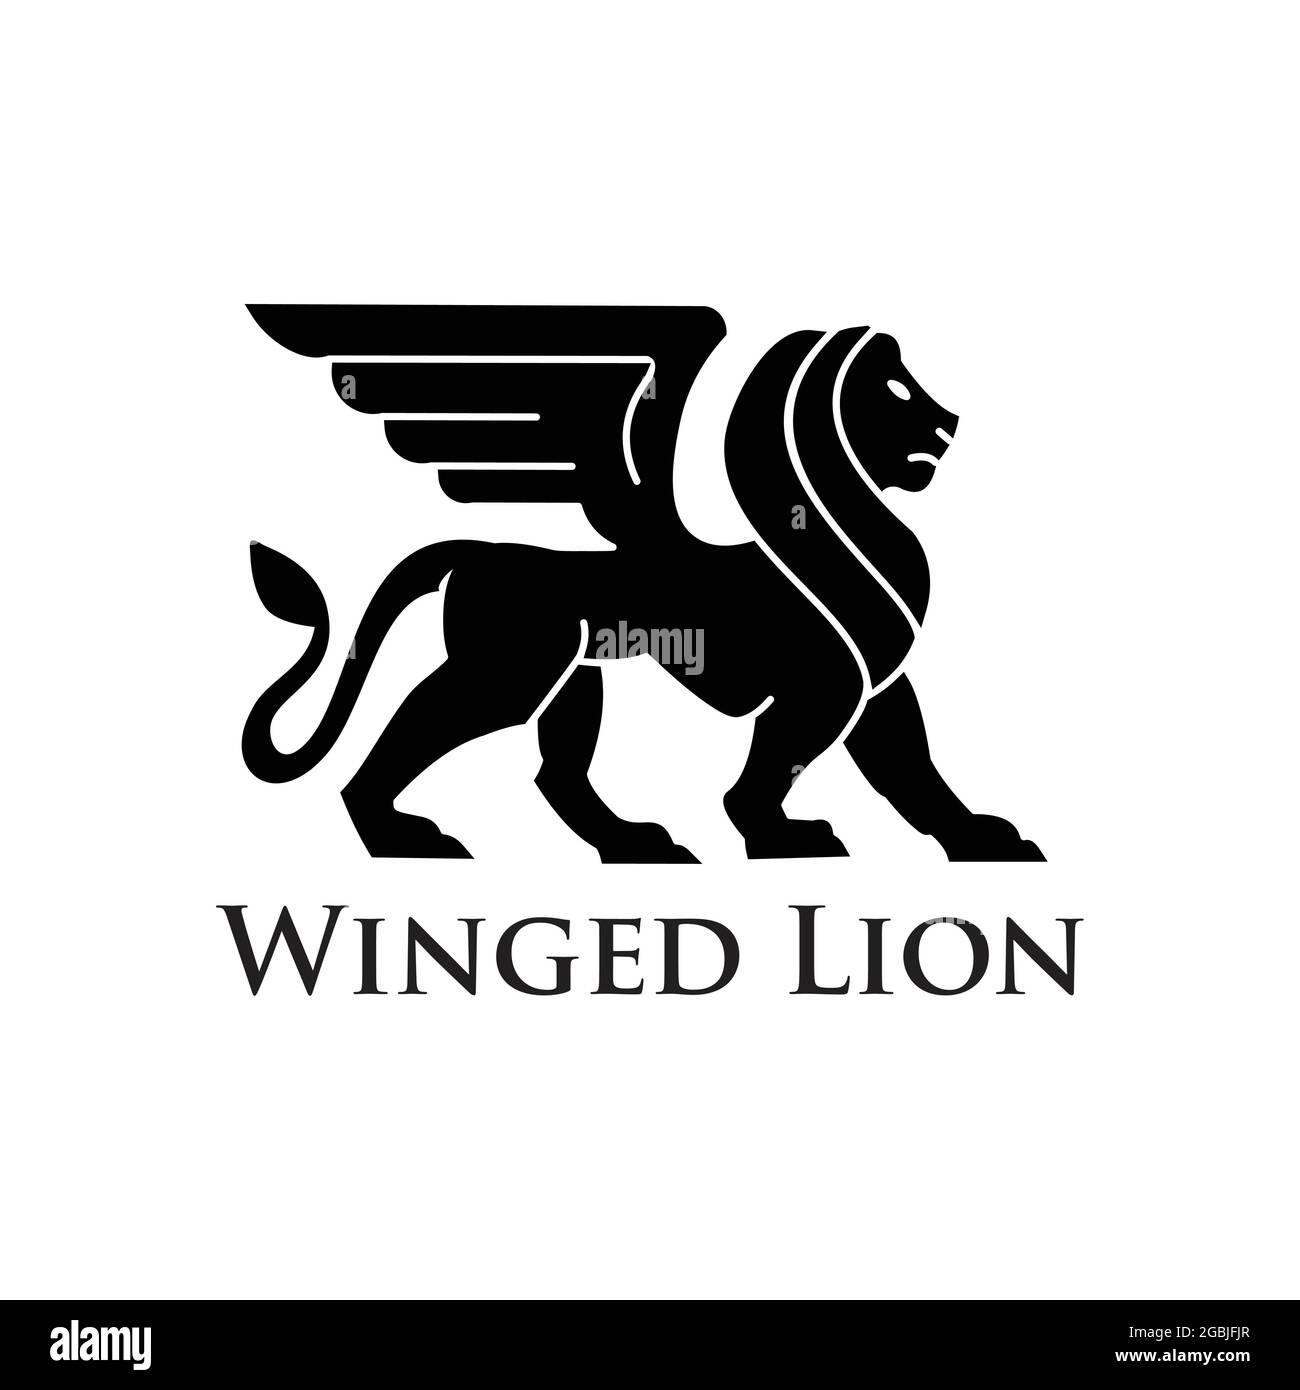 winged lion flat black with white background logo exclusive design inspiration Stock Vector